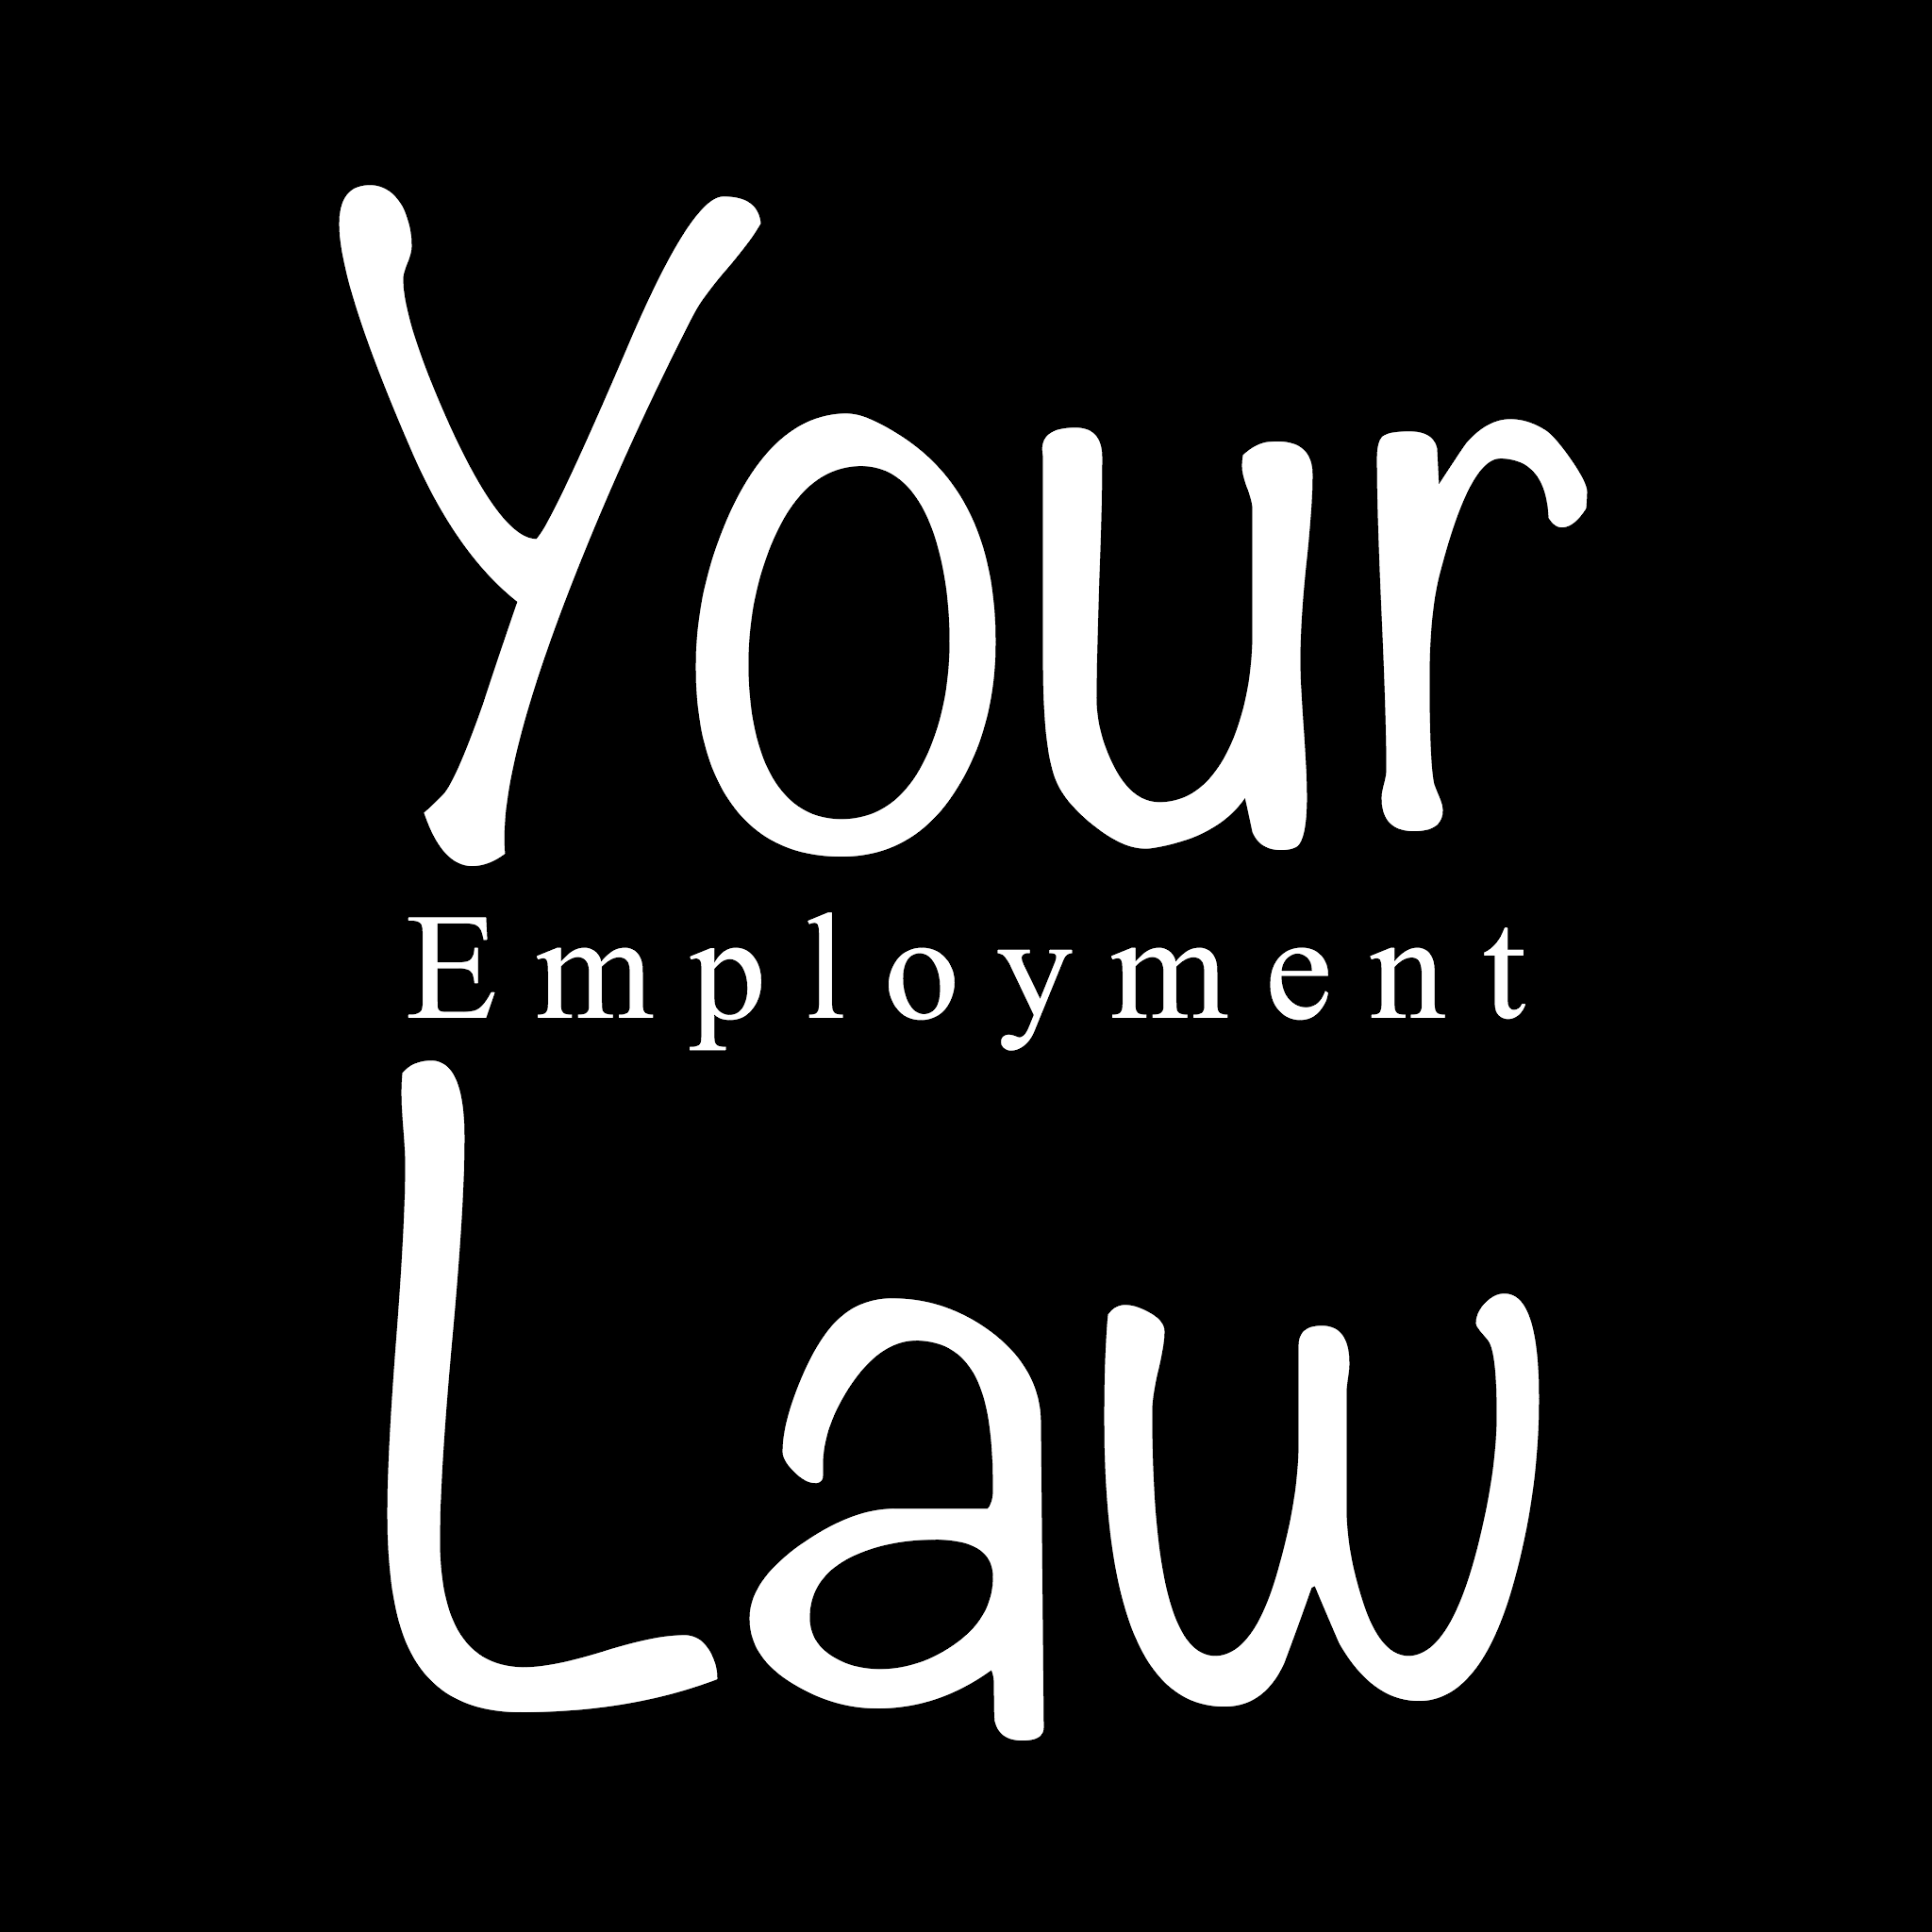 YourLaw.co